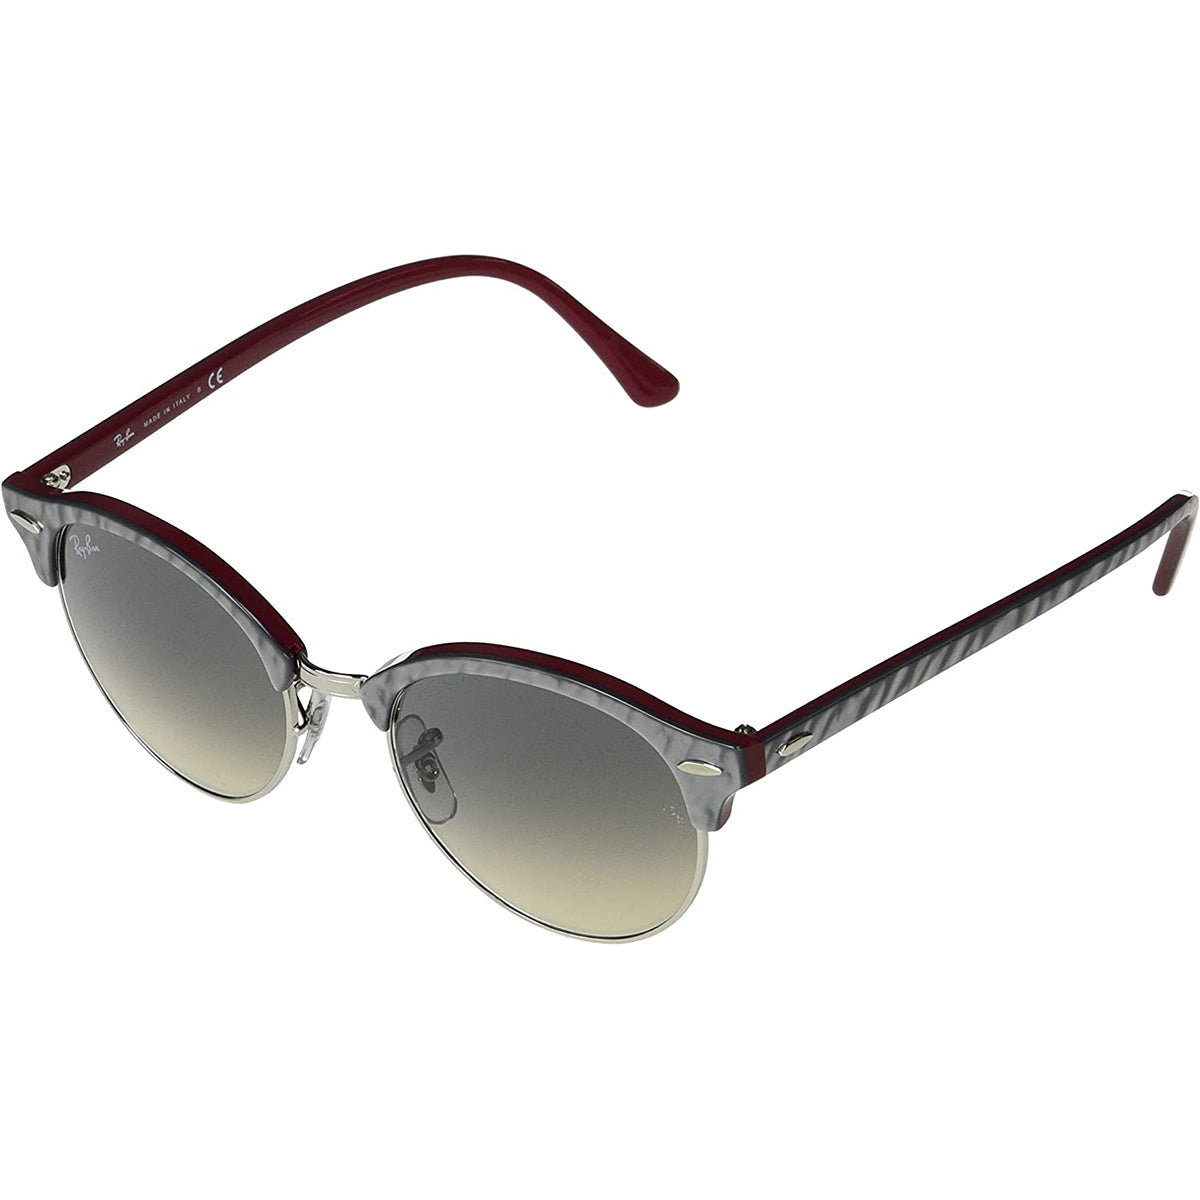 Ray-Ban Clubround Marble Adult Lifestyle Sunglasses-0RB4246